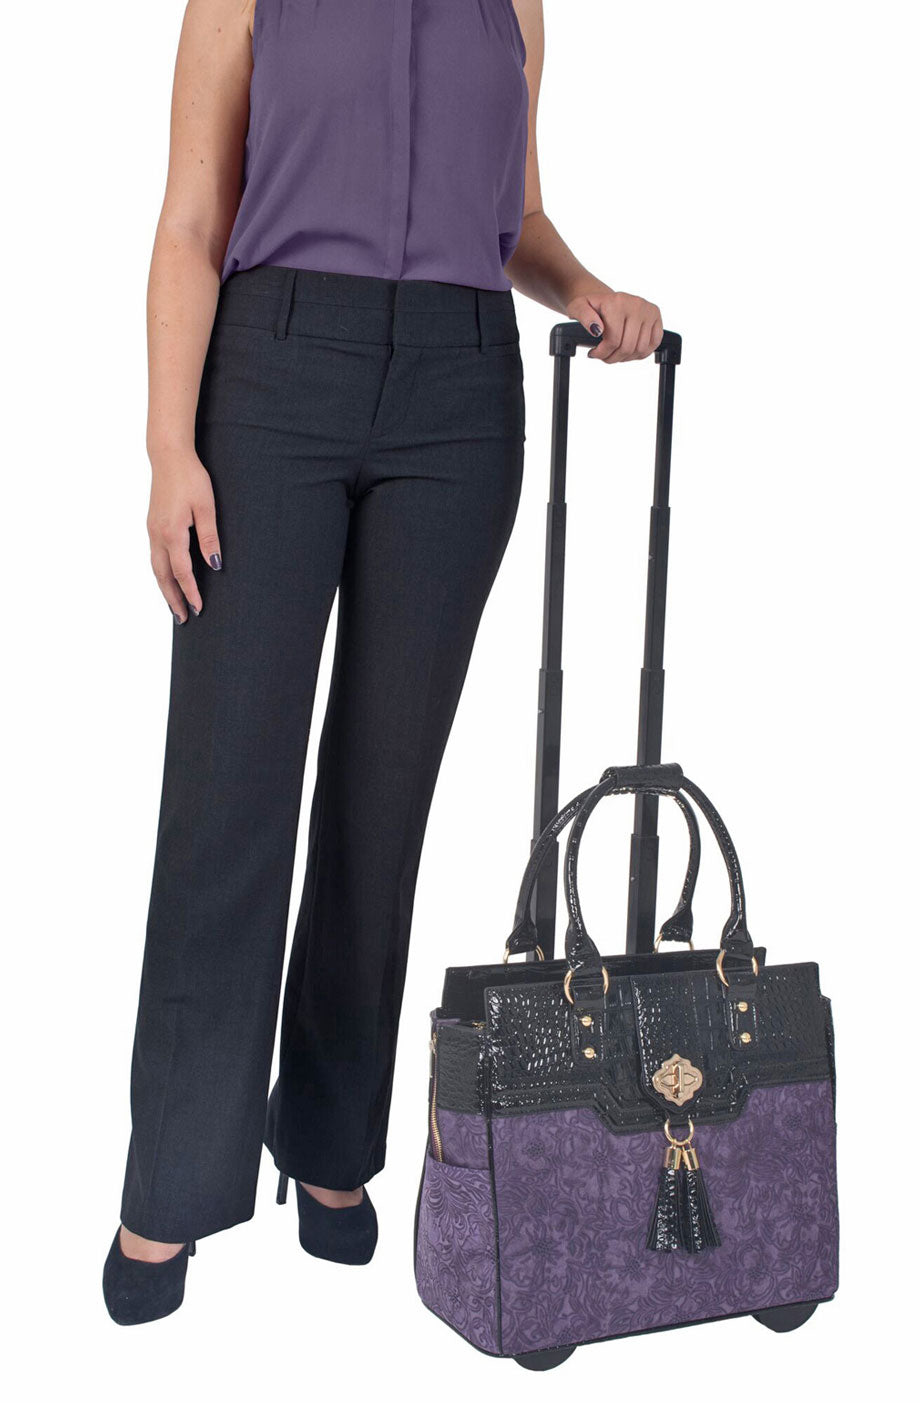 Purple black laptop bag fashion holdall board on carryall tote bag rolling  tote trolley briefcase